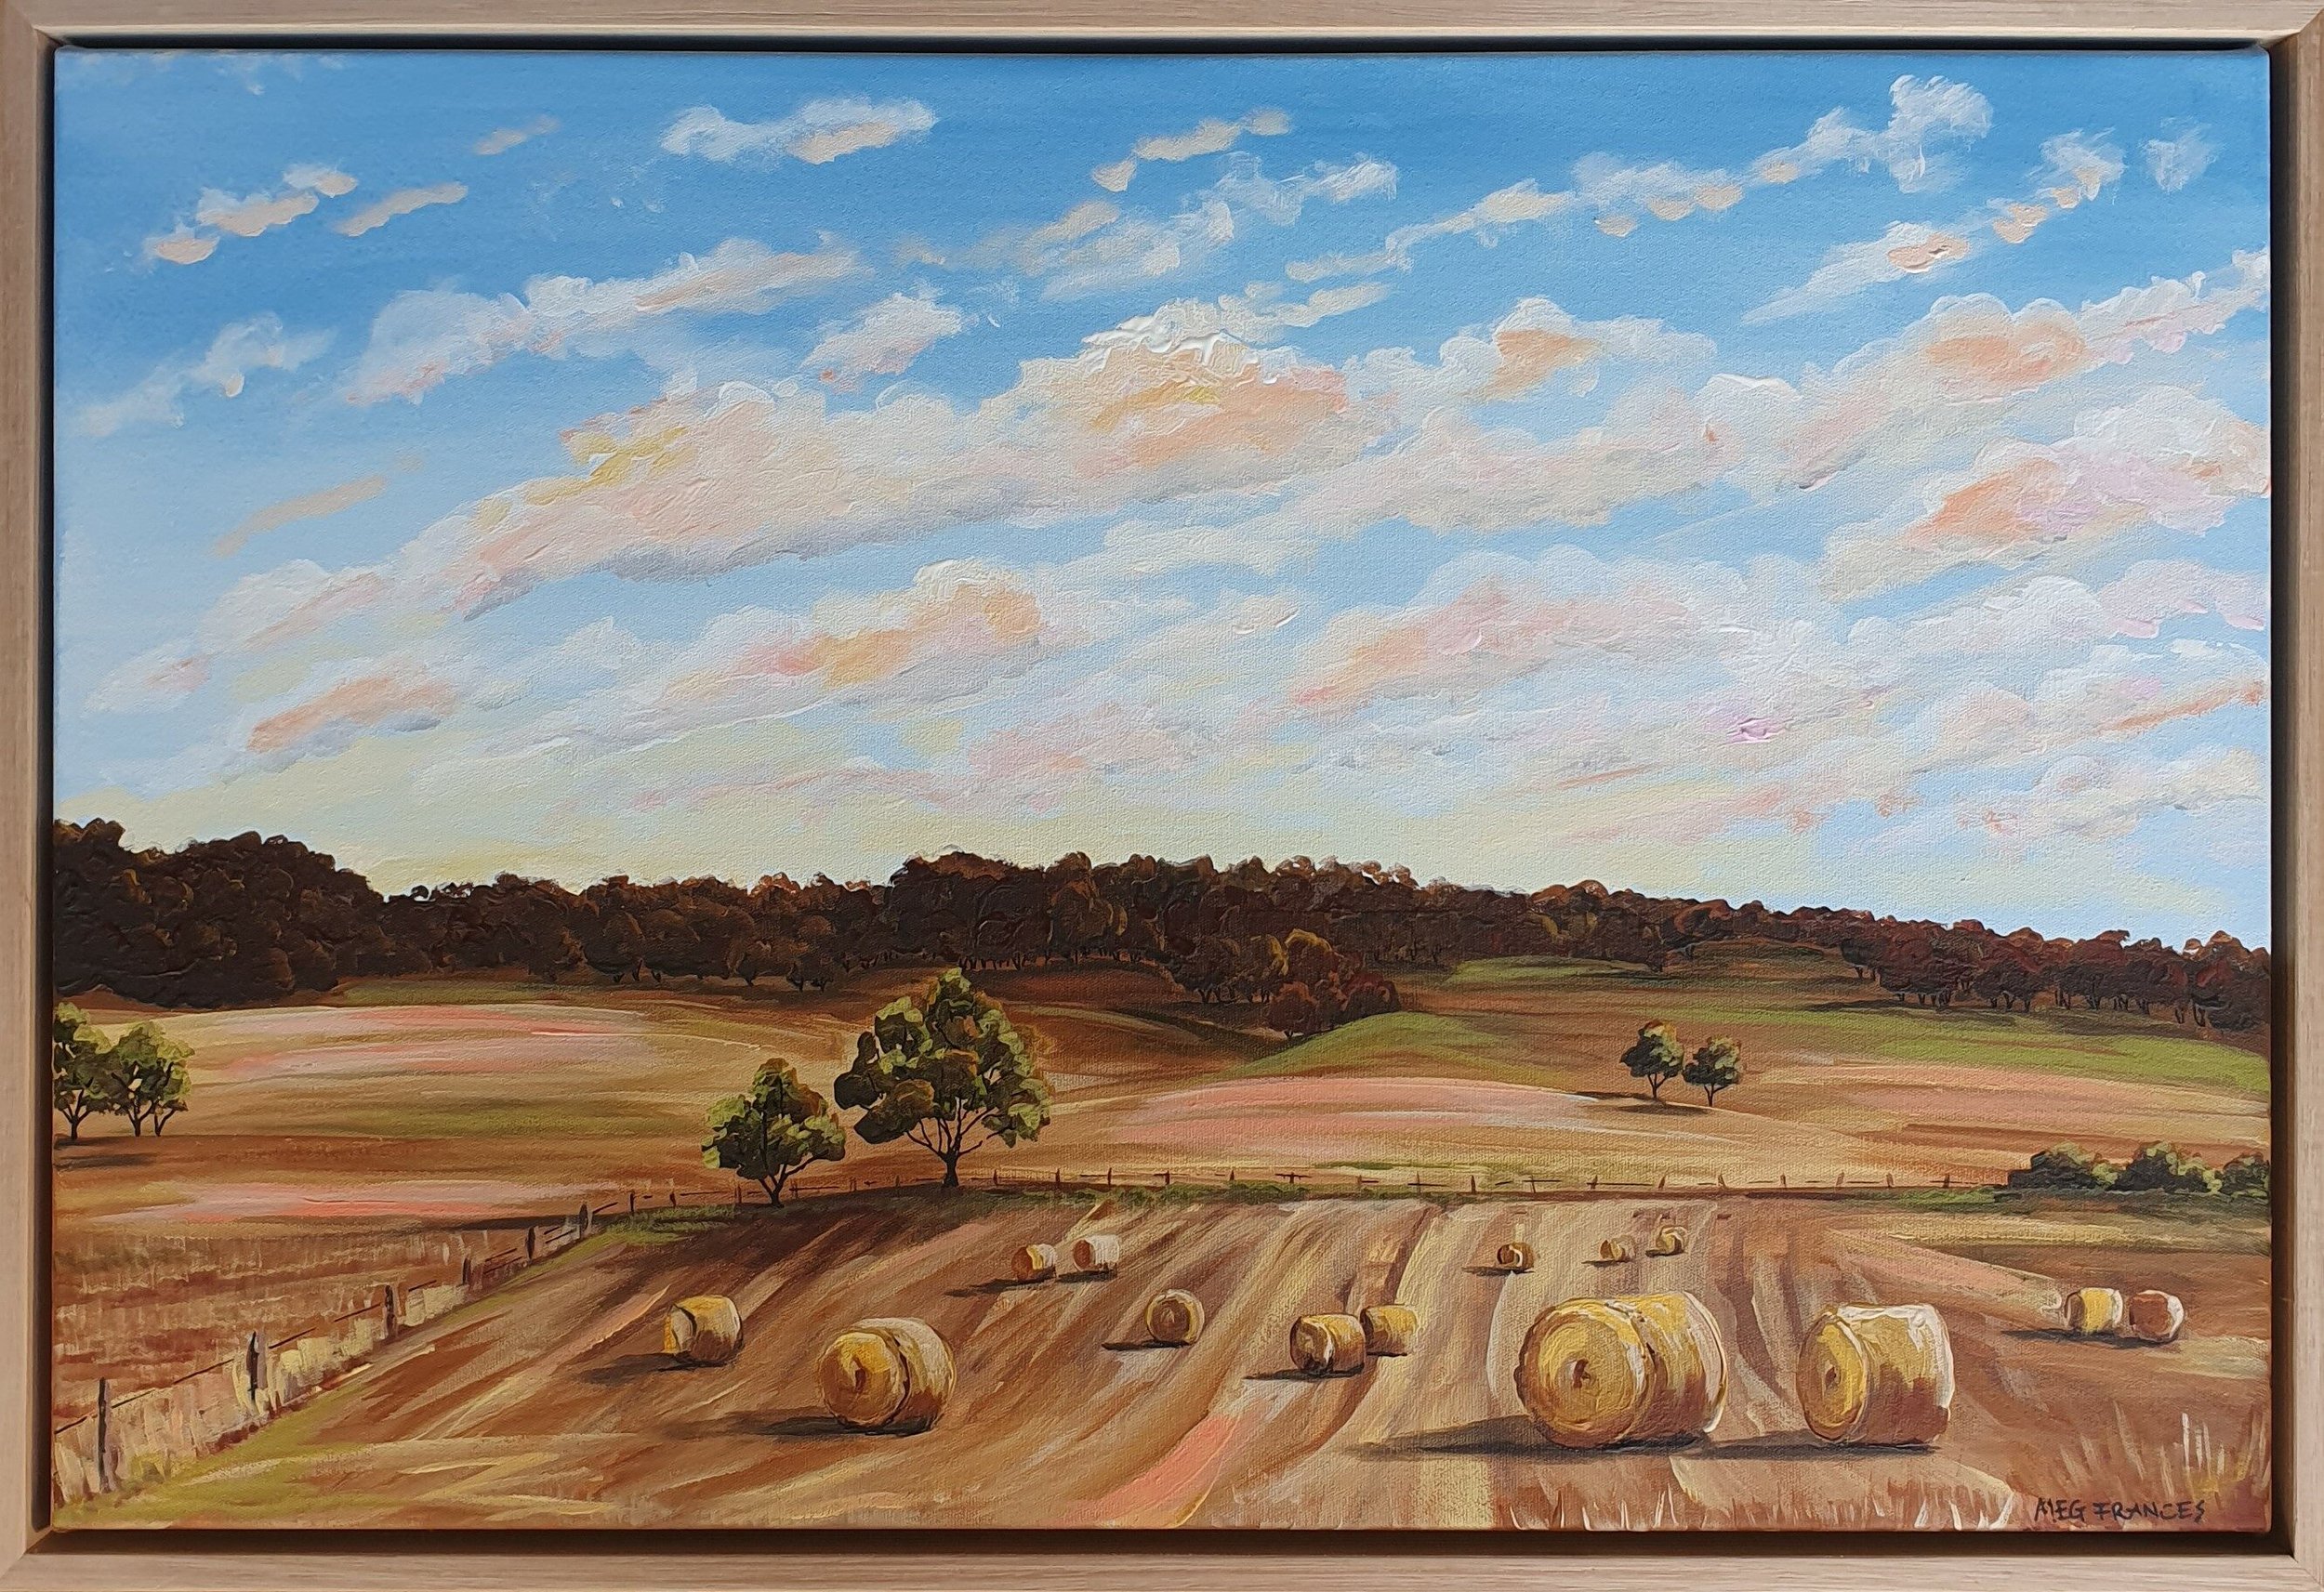 &ldquo;The low paddock&rdquo; SOLD by Meg Frances is one of the many in her collection that have sold during the Land &amp; Sky exhibition. With only a couple of weeks left before our walls all change again, take the time to visit this beautiful exhi